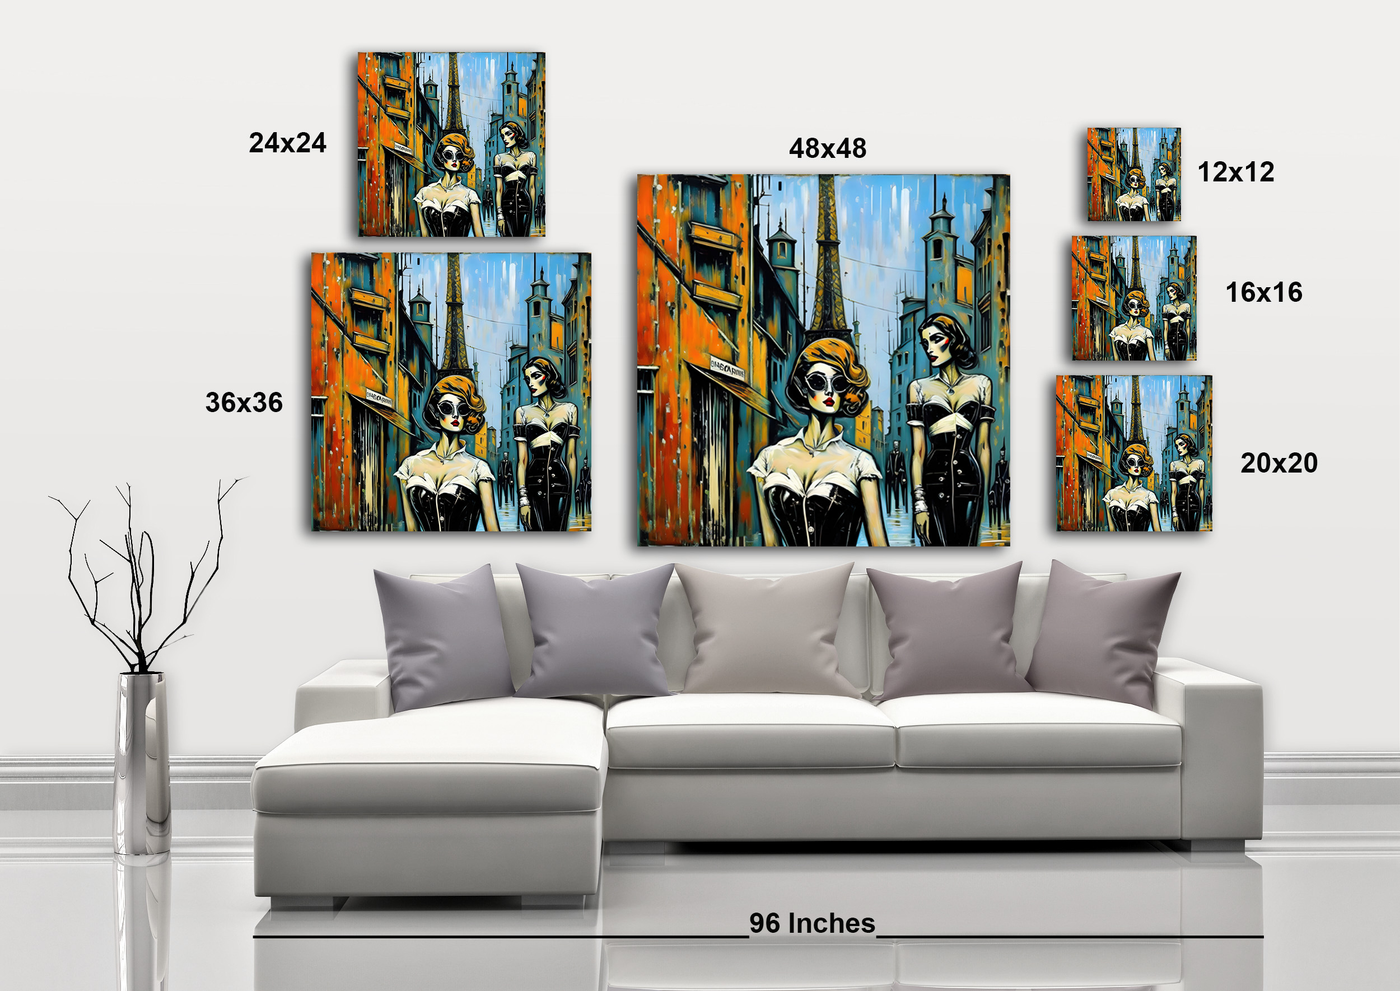 Backstreets of Paris - Gallery Wrapped Canvas